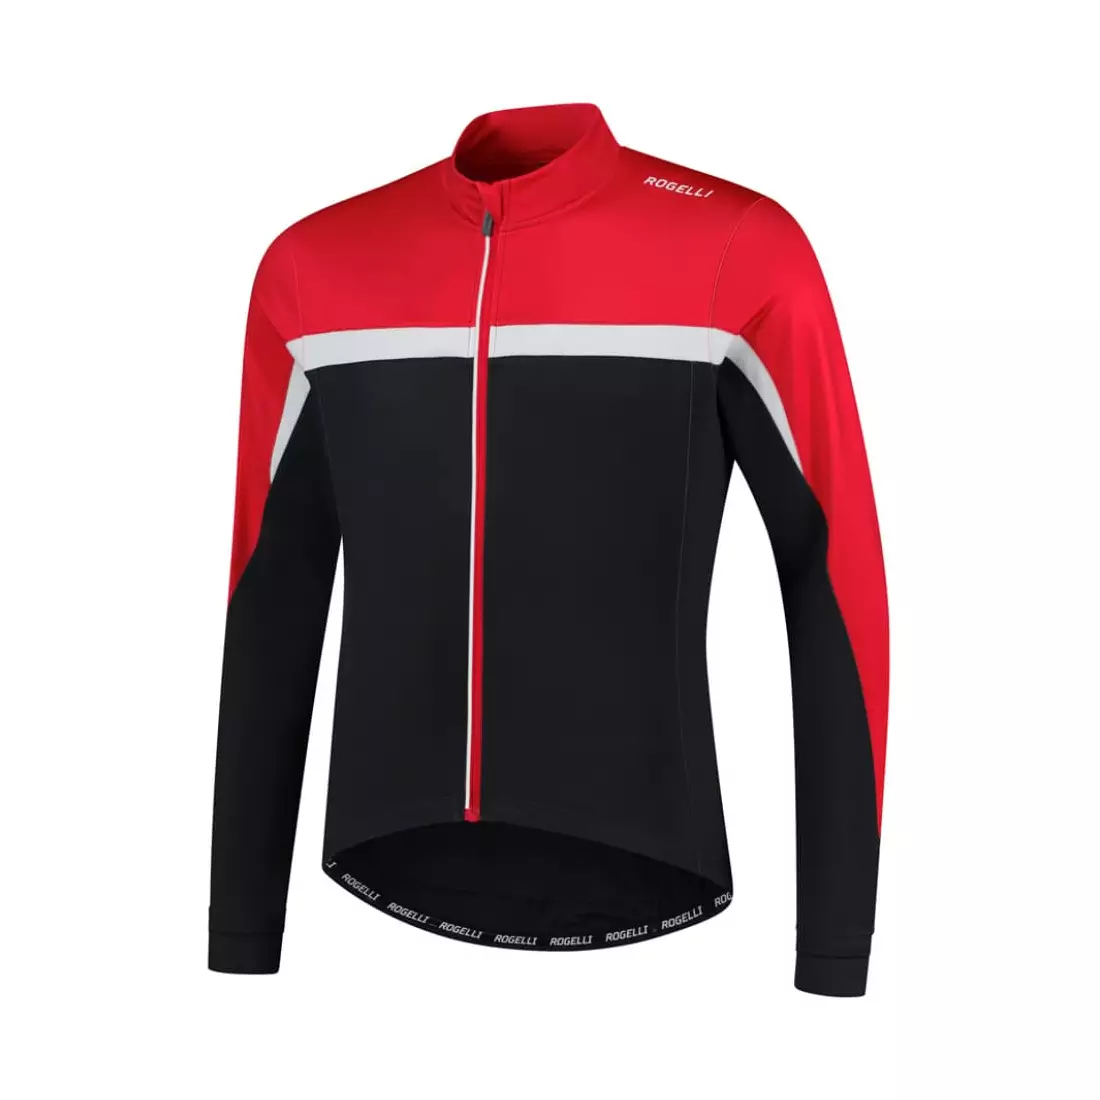 Rogelli COURSE kids cycling sweatshirt, black and red